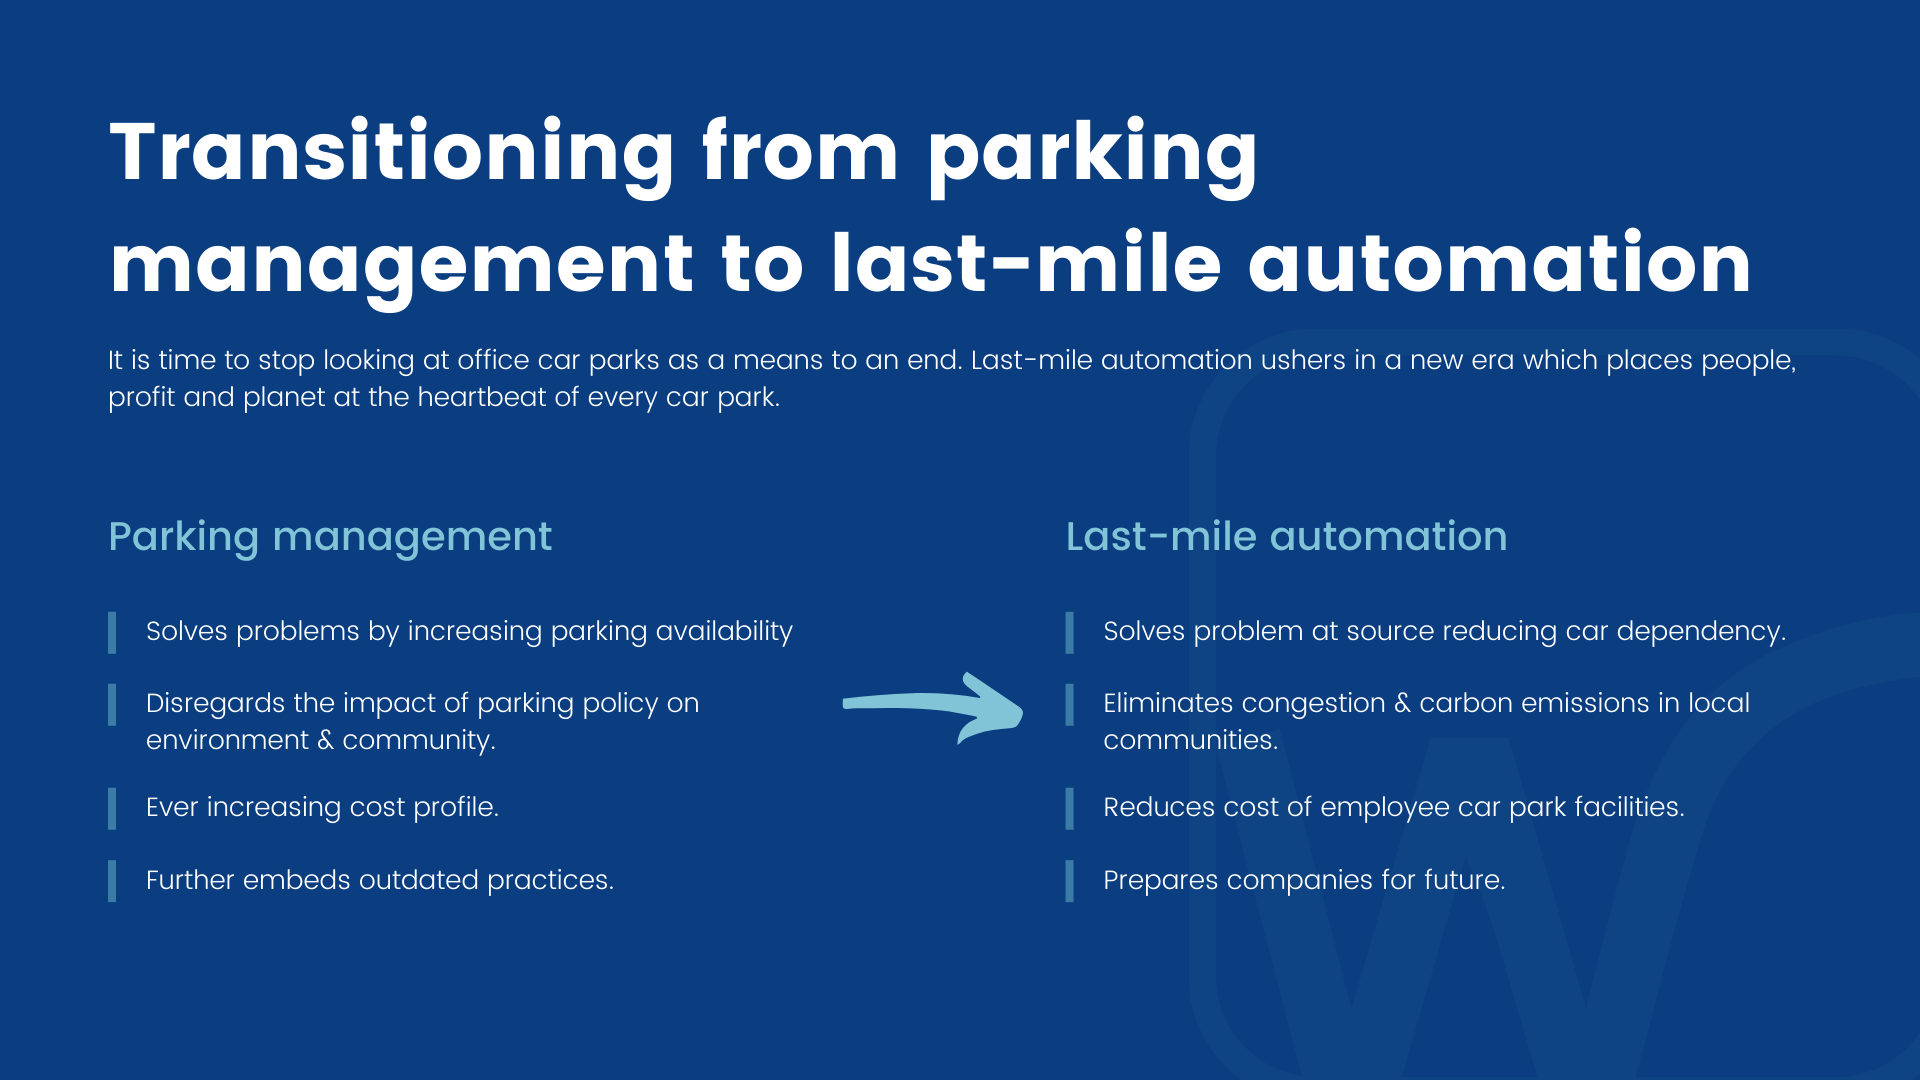 Transitioning from parking management to last-mile automation